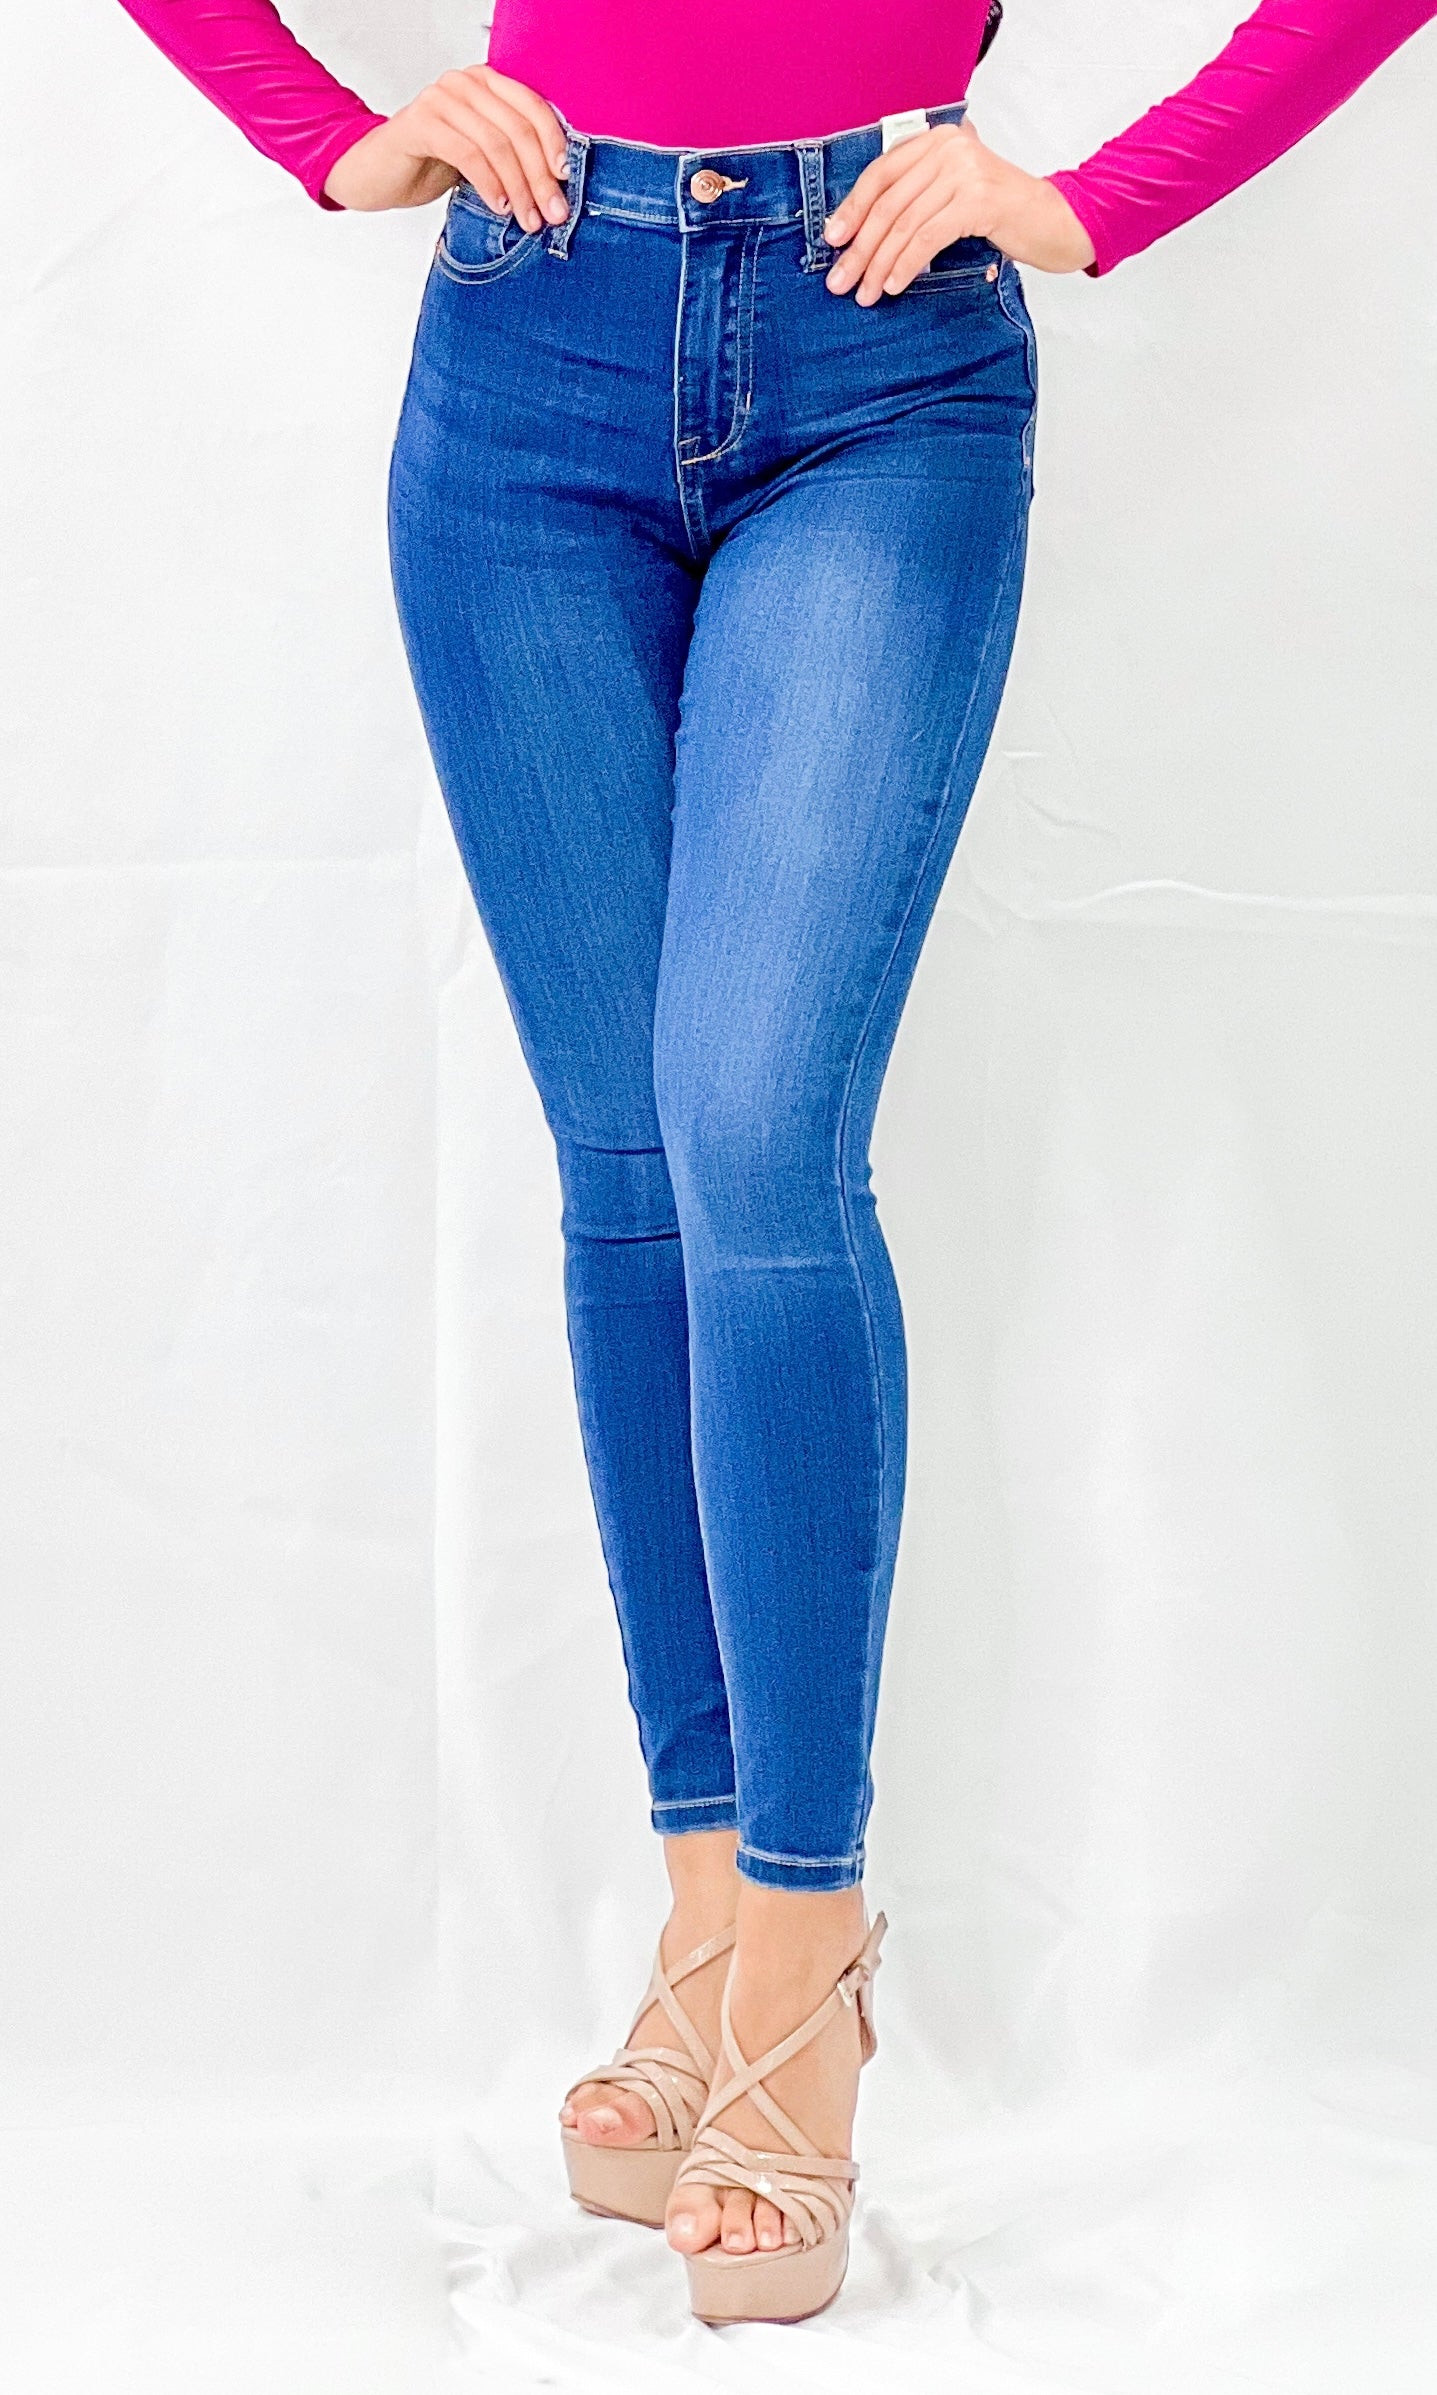 Ankle Skinny Jeans